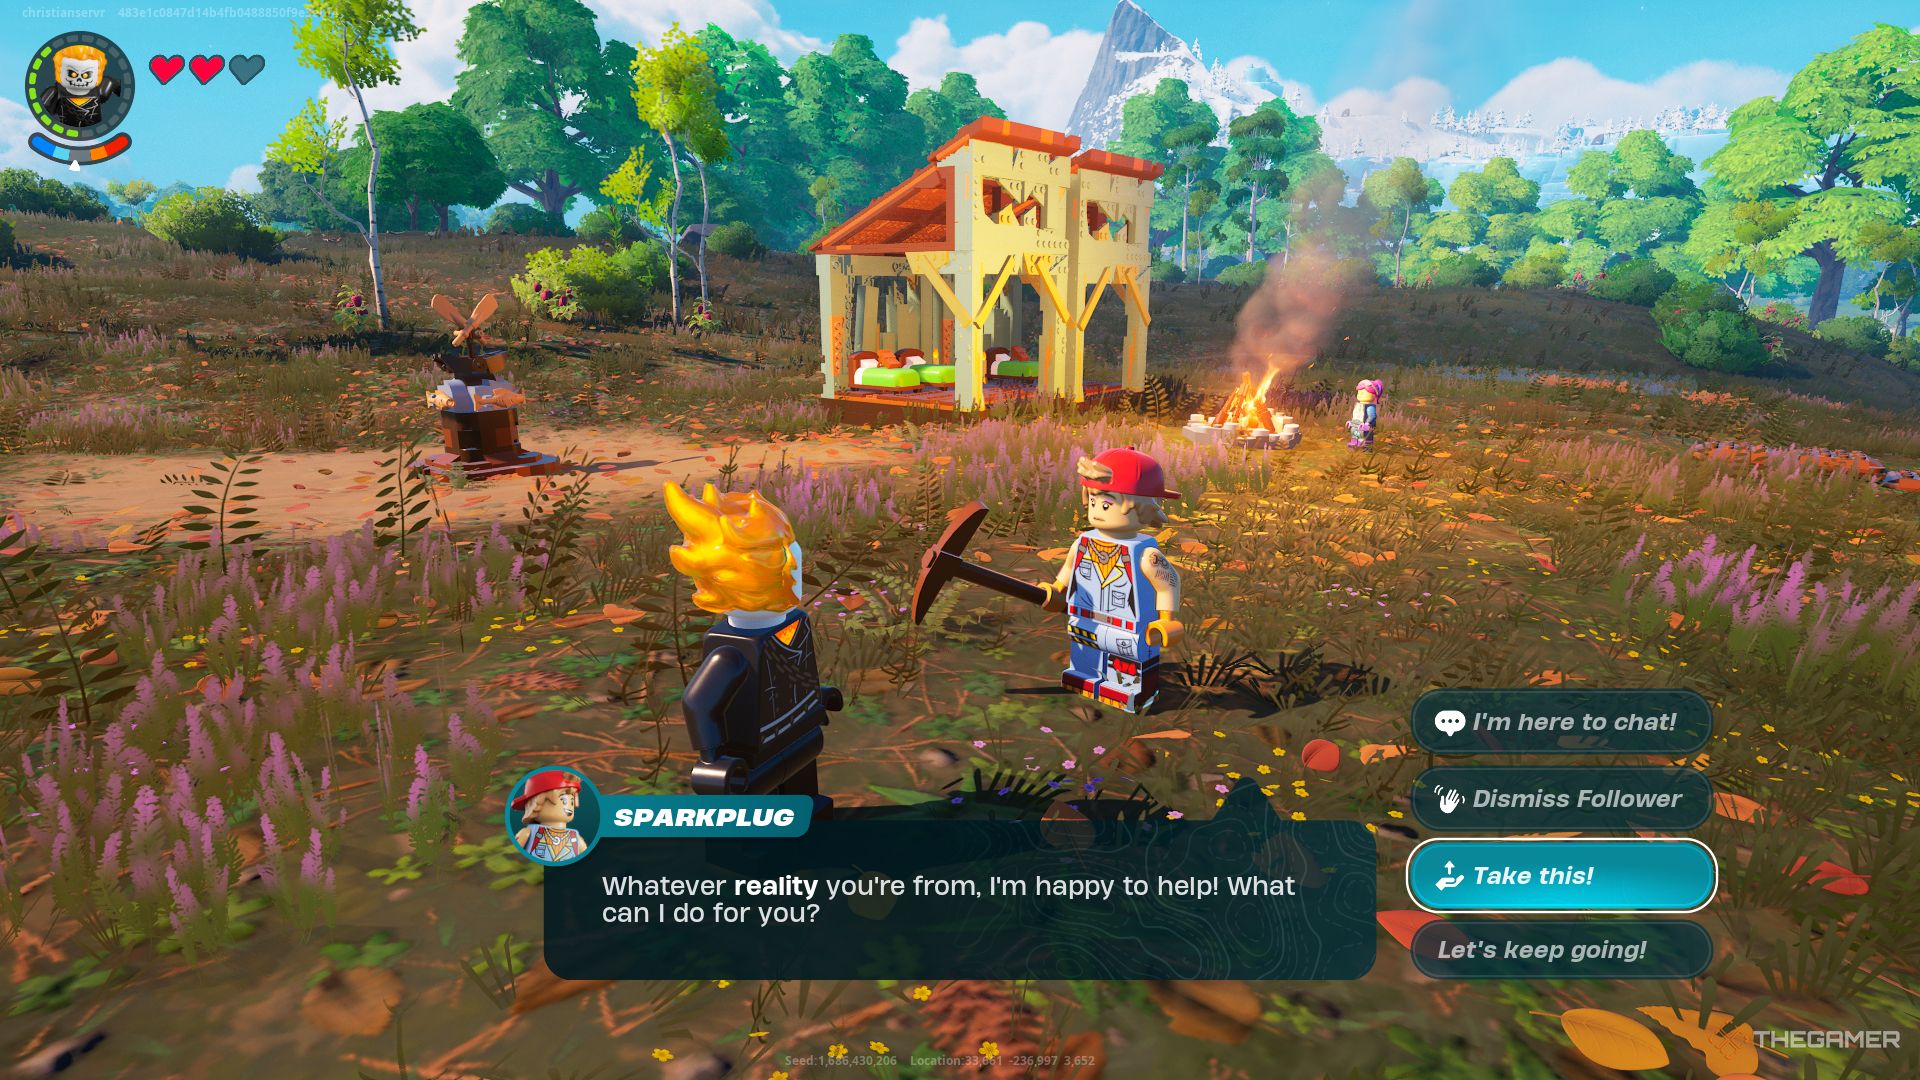 A screenshot from Lego Fortnite showing a figure of Ghost Rider talking to Sparkplug, with the option to give them a tool highlighted.